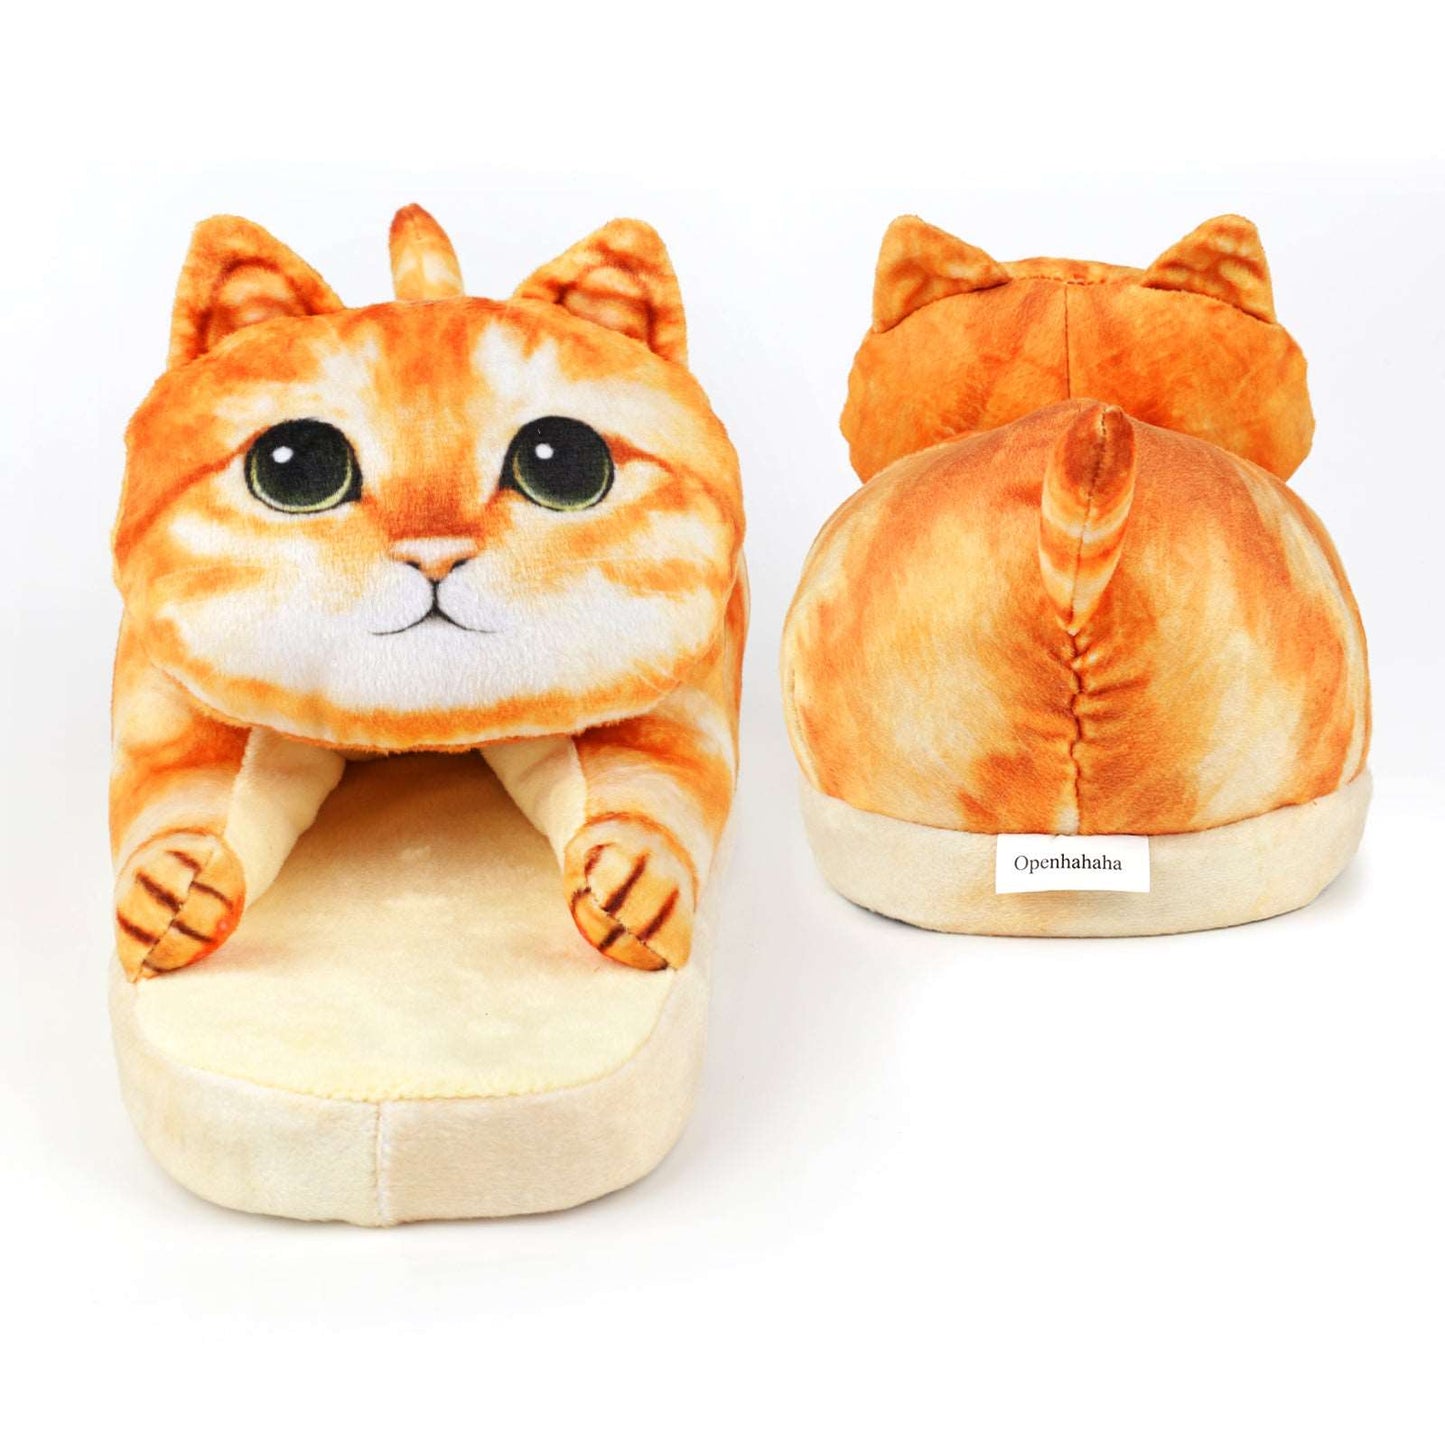 Plush cat slippers, a gift for cat lovers